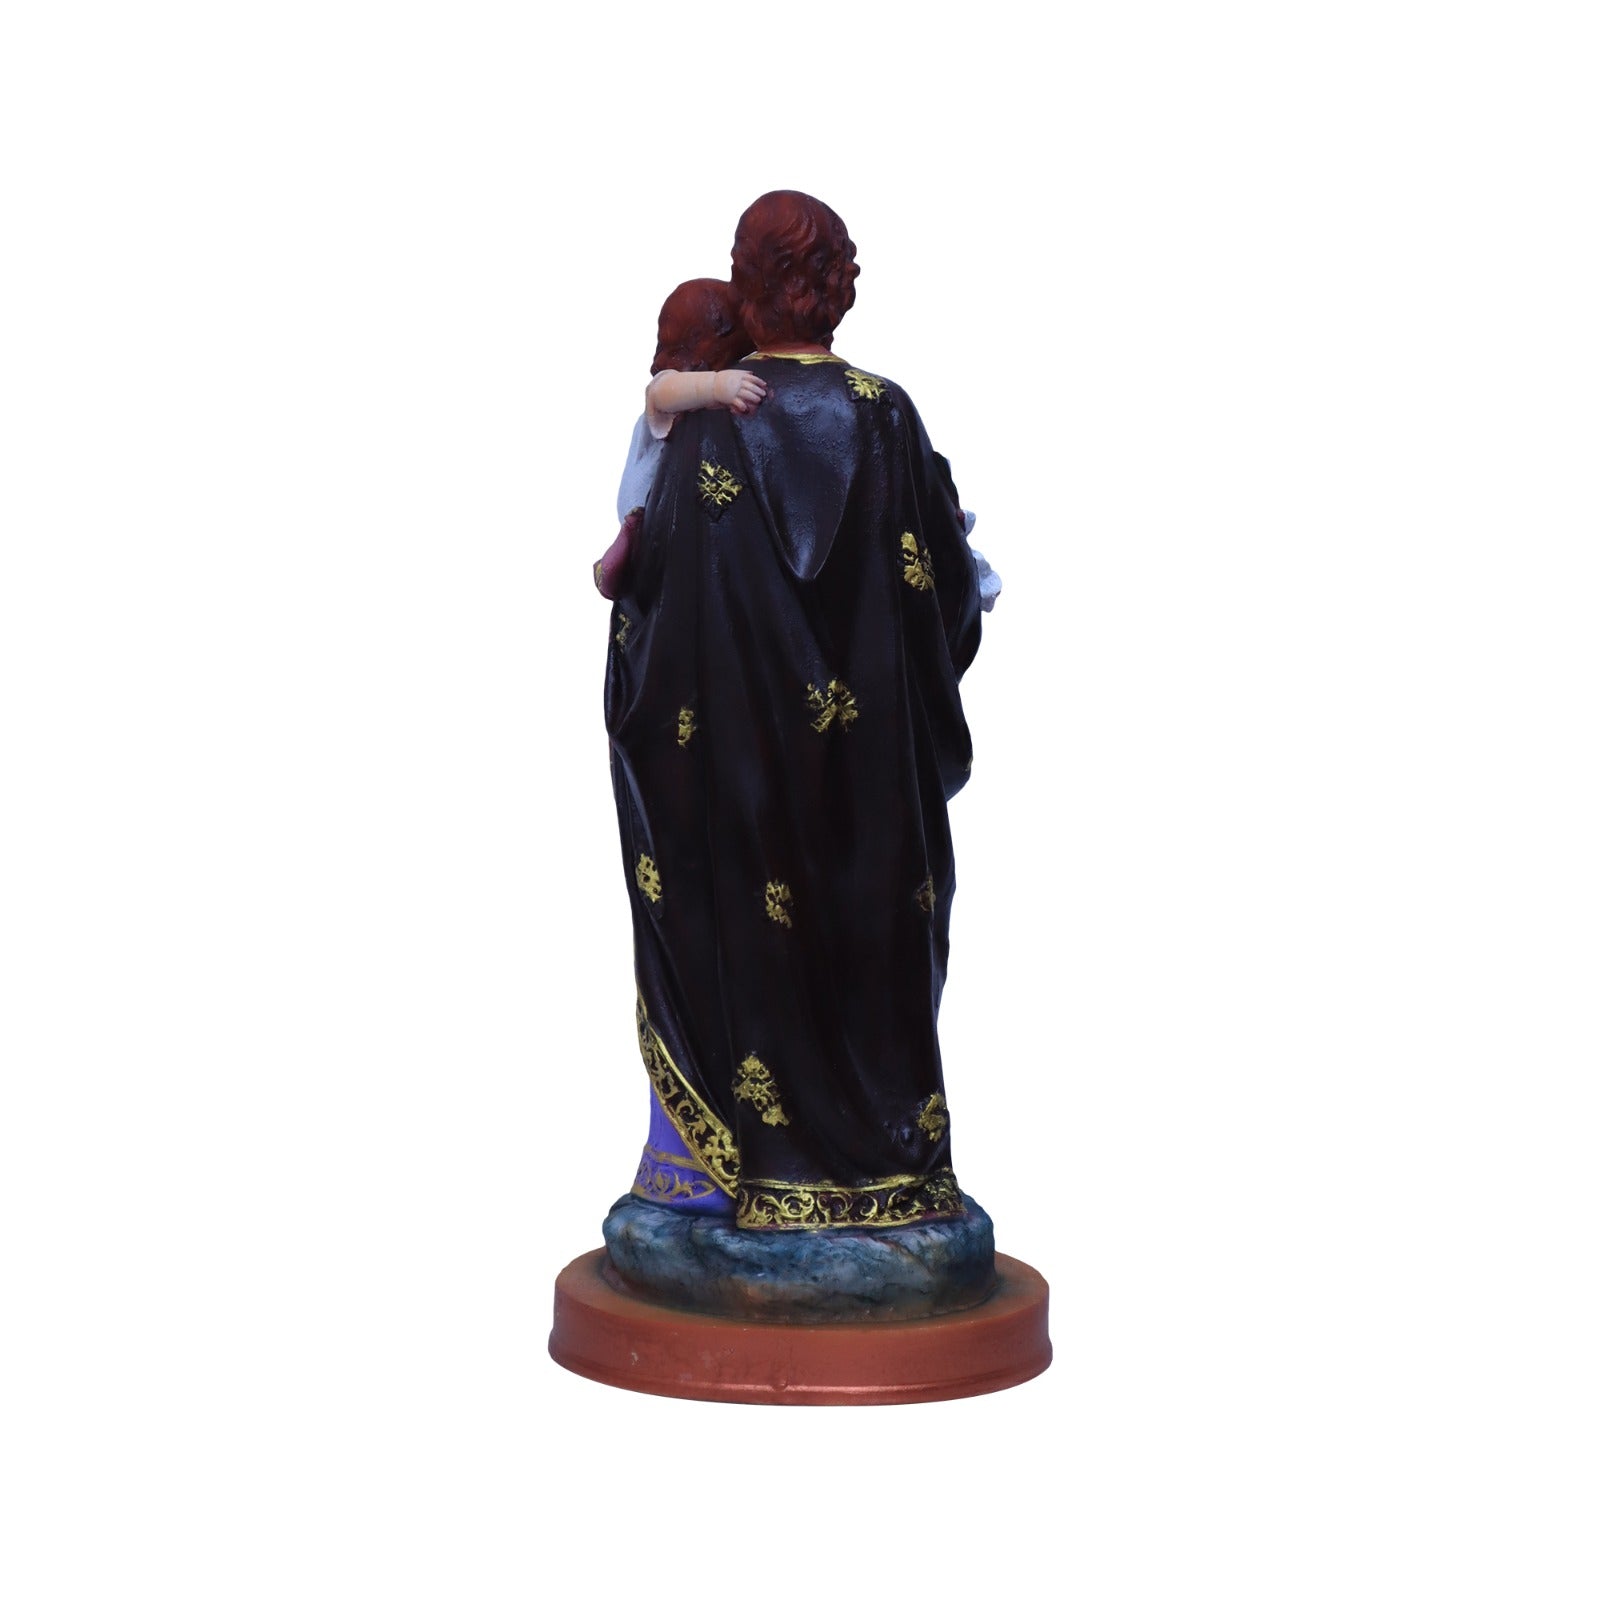 St. Joseph Statue - 12 Inch | Patron Saint of Workers and Fathers | Living Words